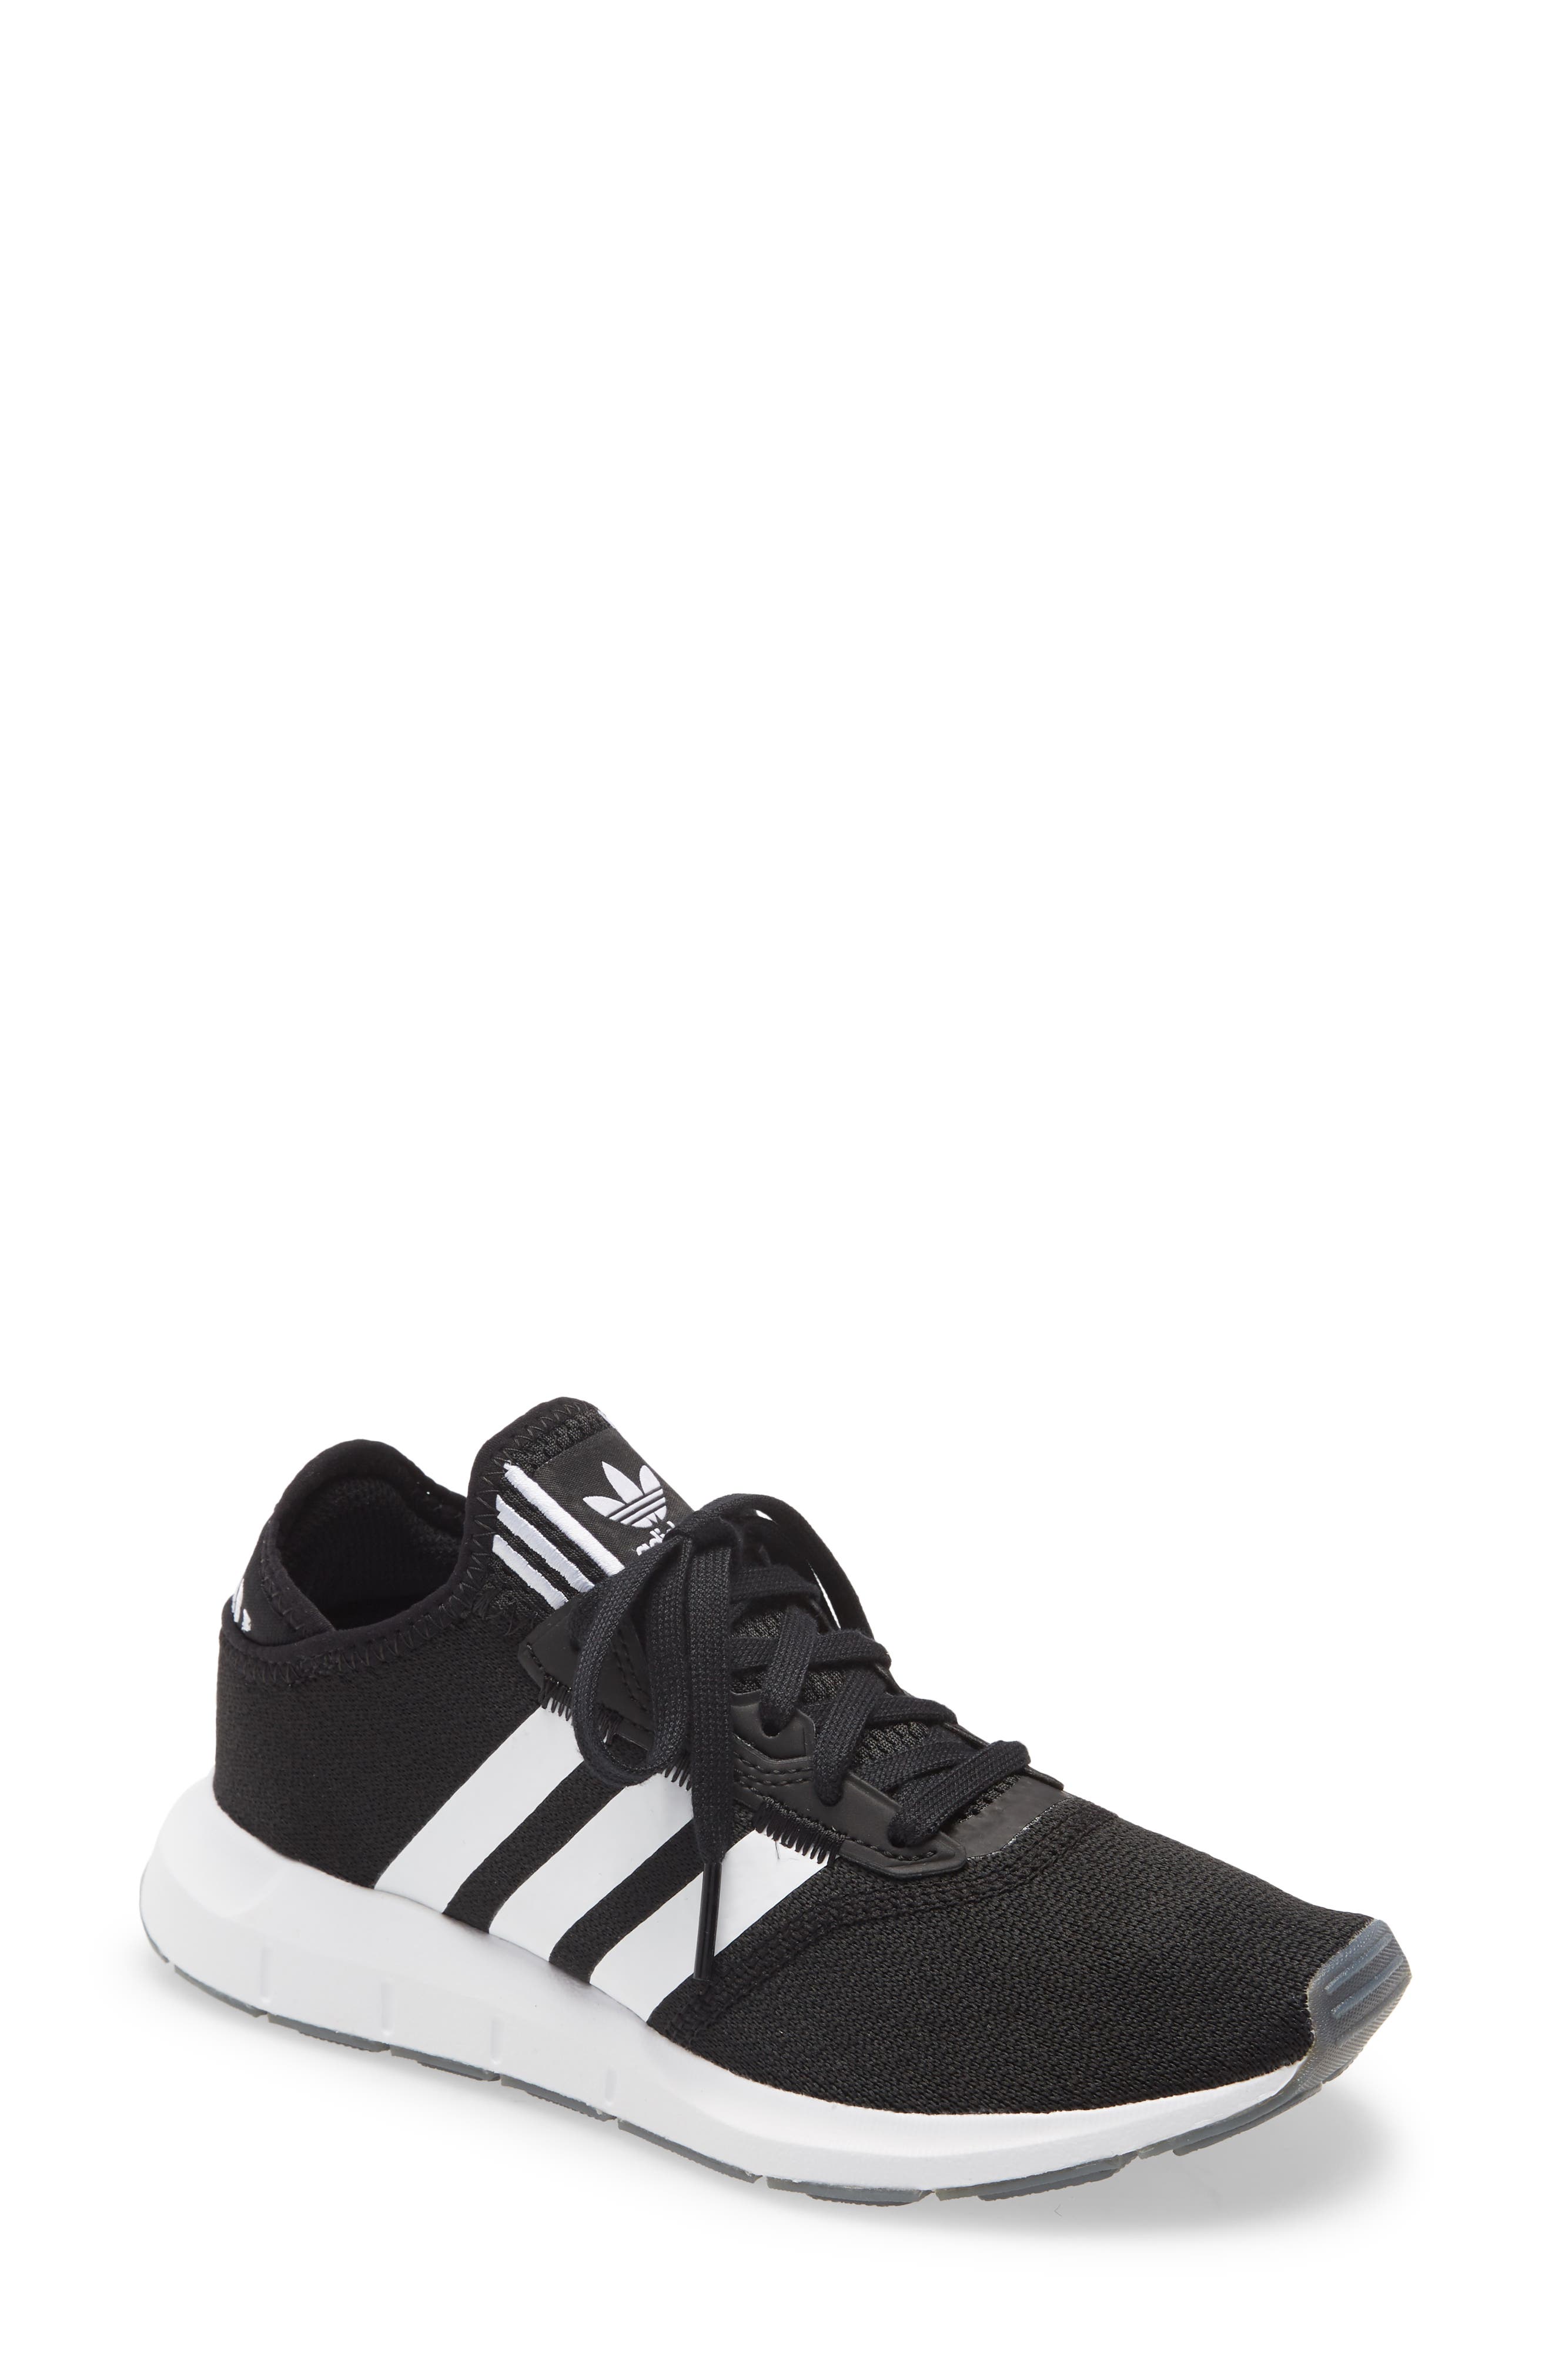 adidas shoes on clearance